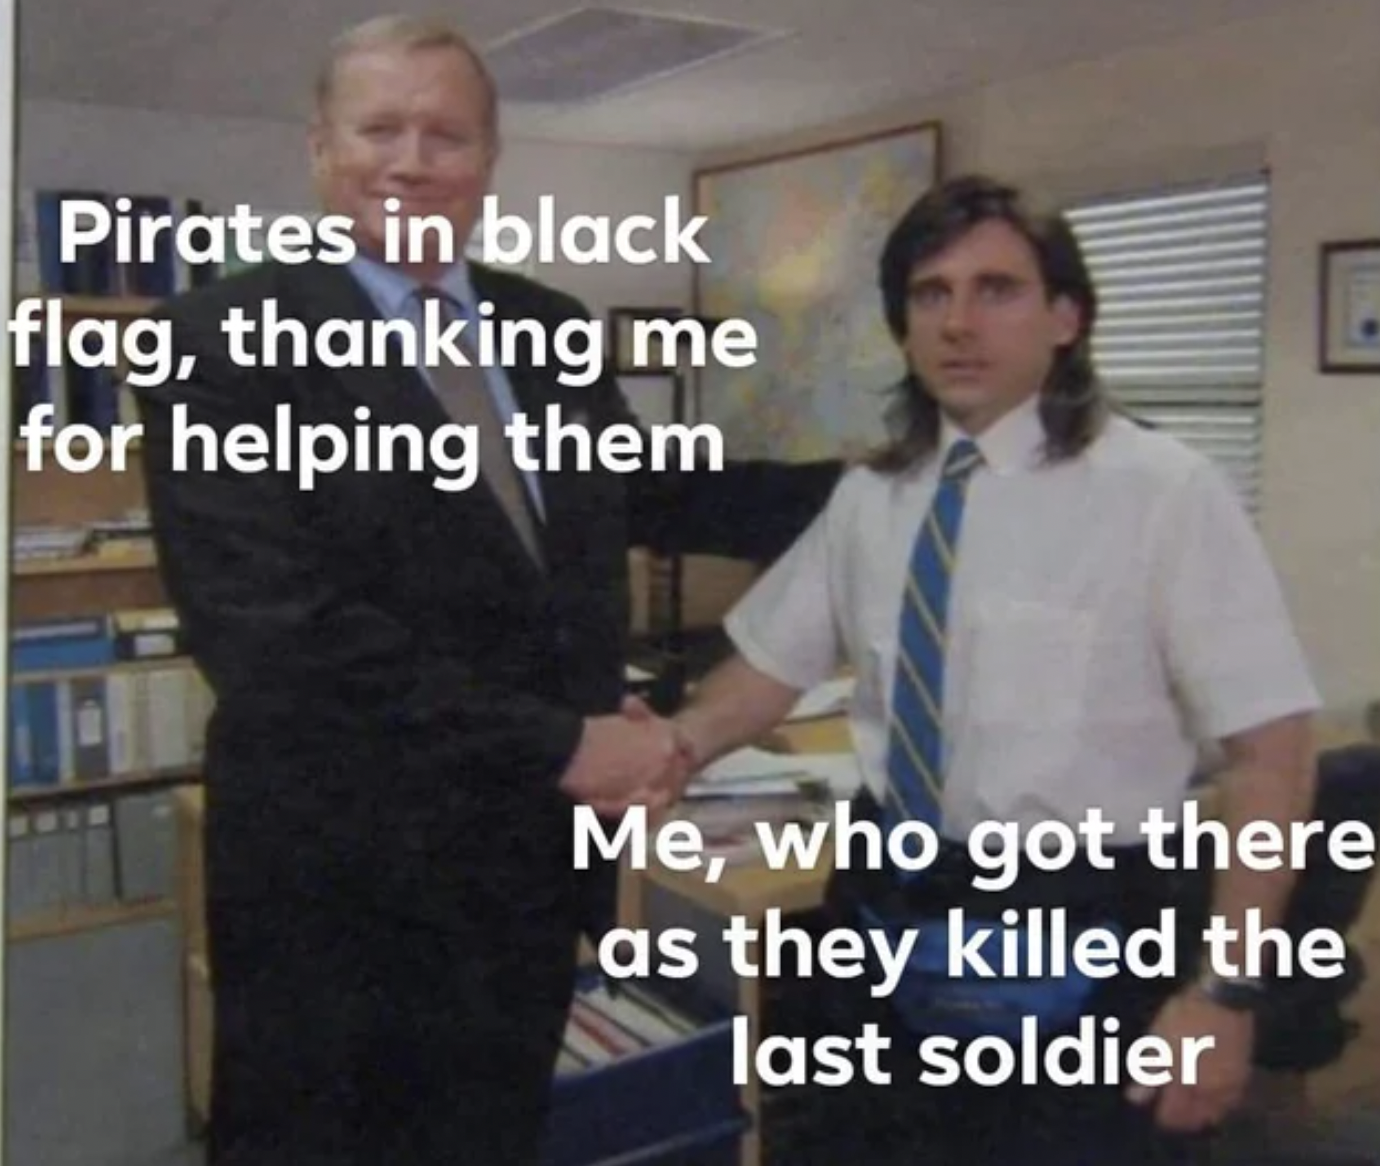 Assassin's Creed Memes - agniveer meme - Pirates in black flag, thanking me for helping them Me, who got there as they killed the last soldier